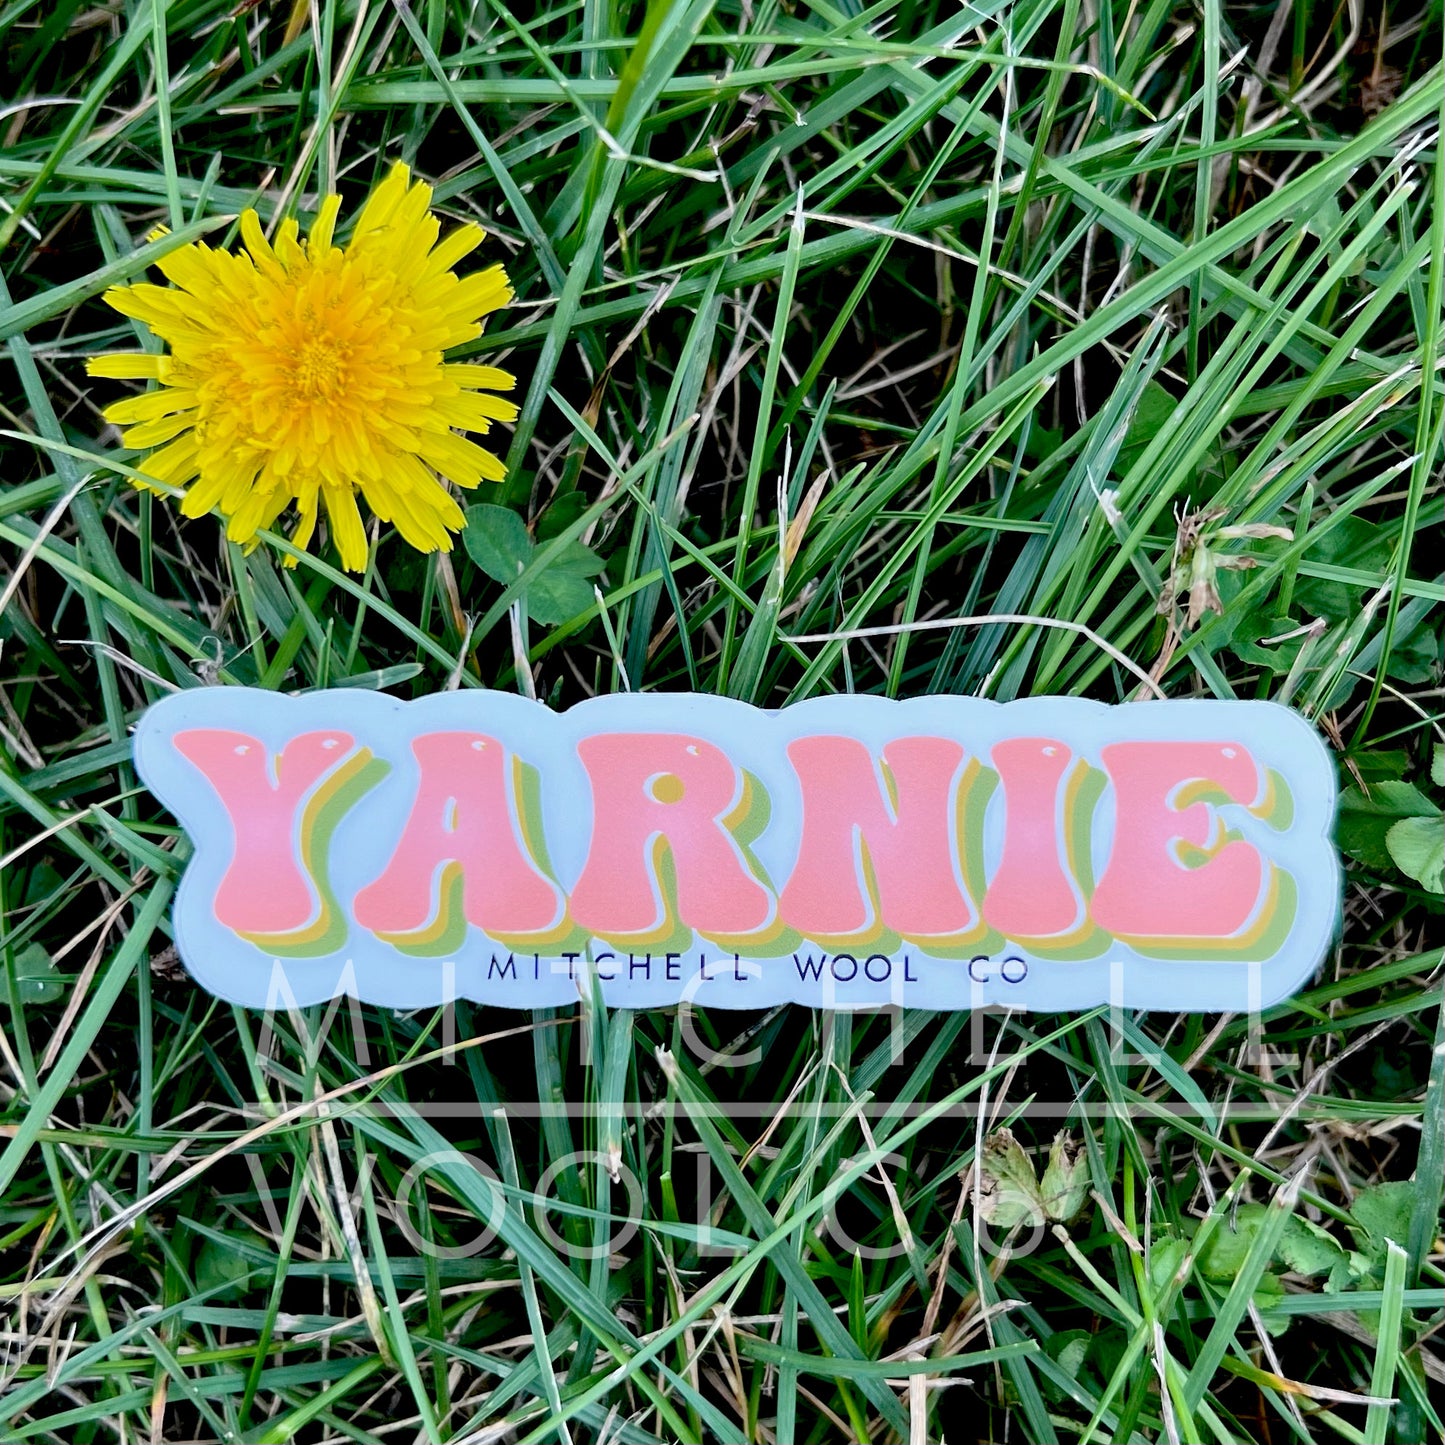 YARNIE with mwc at the bottom in seventies font and bright colors